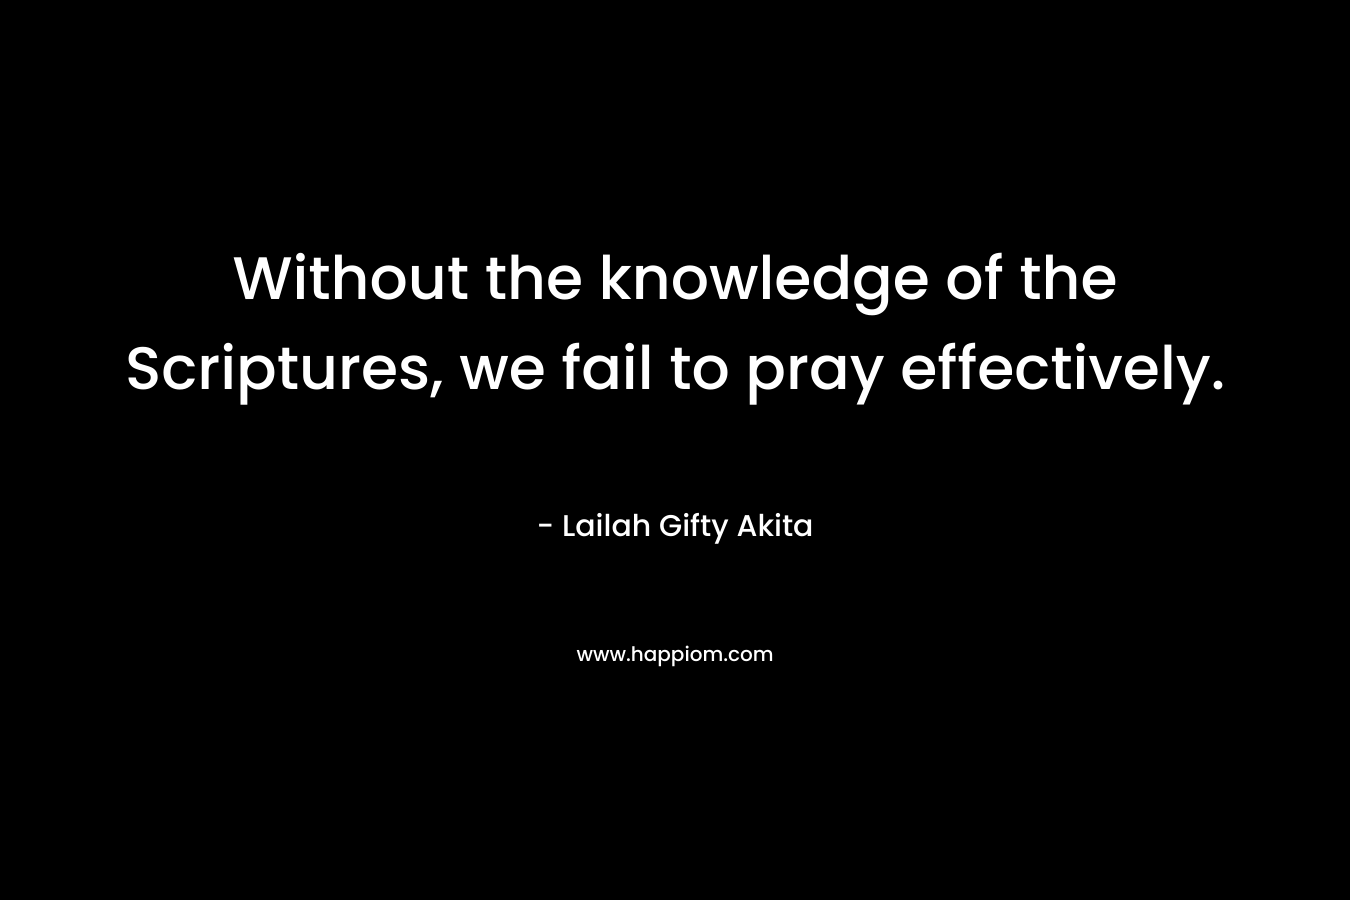 Without the knowledge of the Scriptures, we fail to pray effectively.